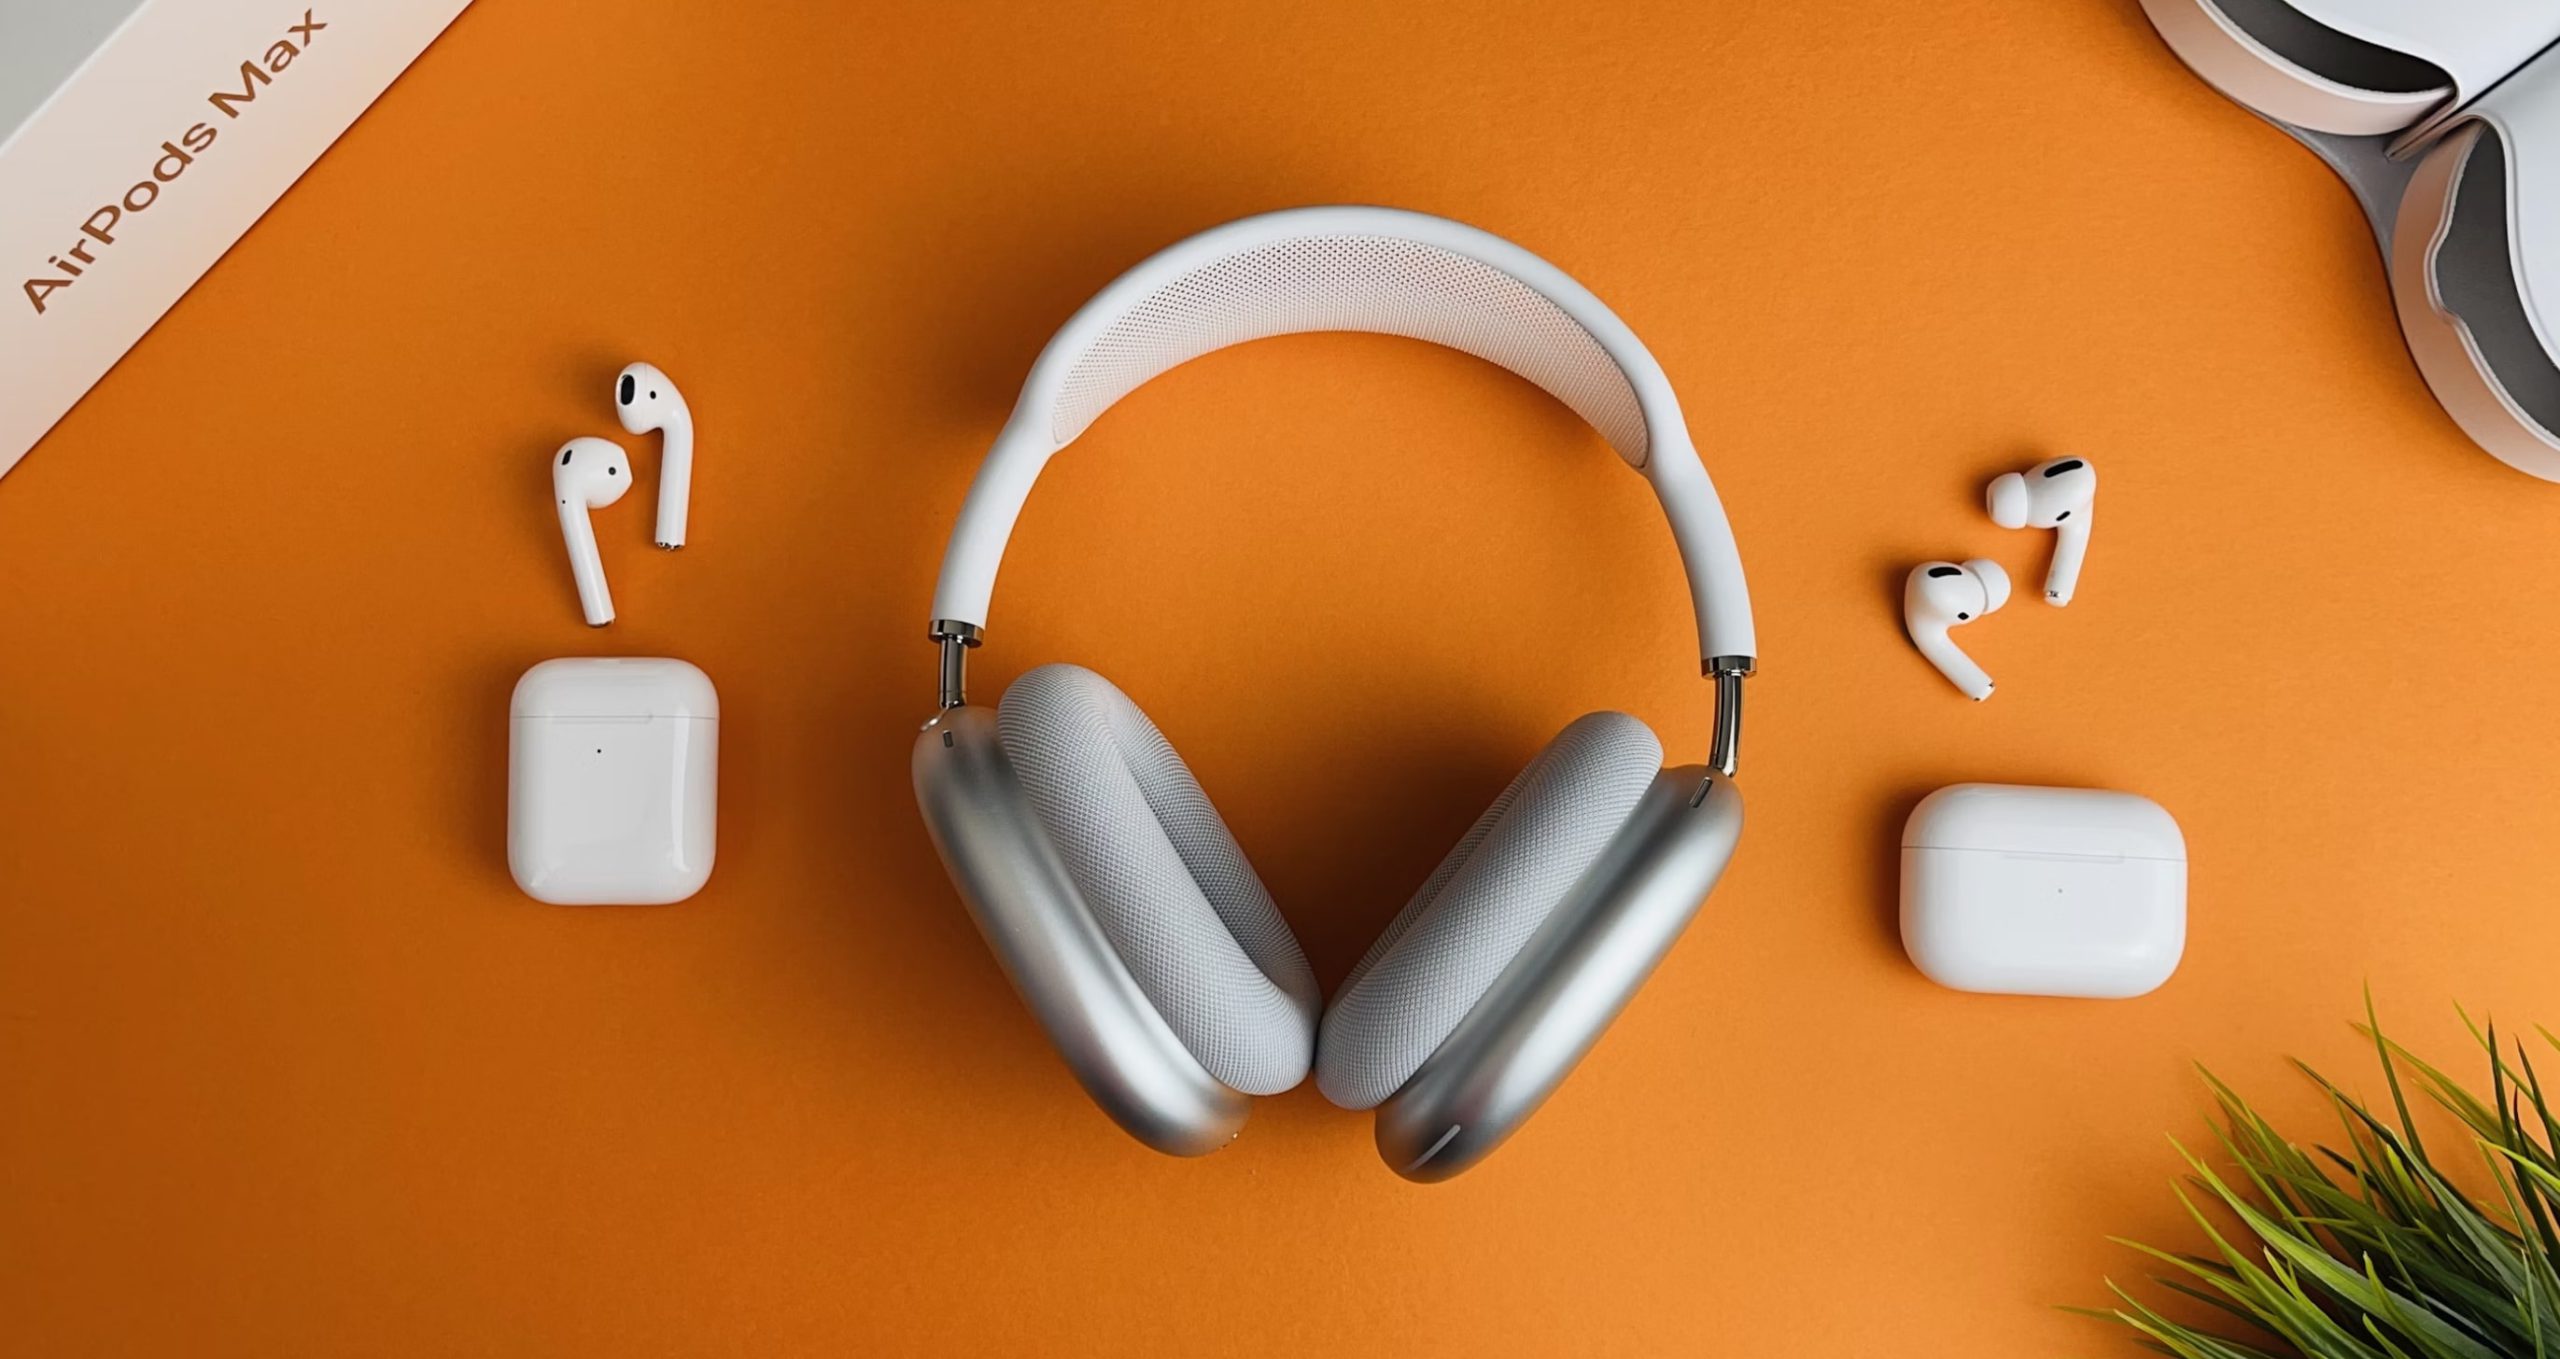 AirPods 2 (Left), AirPods Max (Middle), and AirPods Pro (Right) on an orange surface